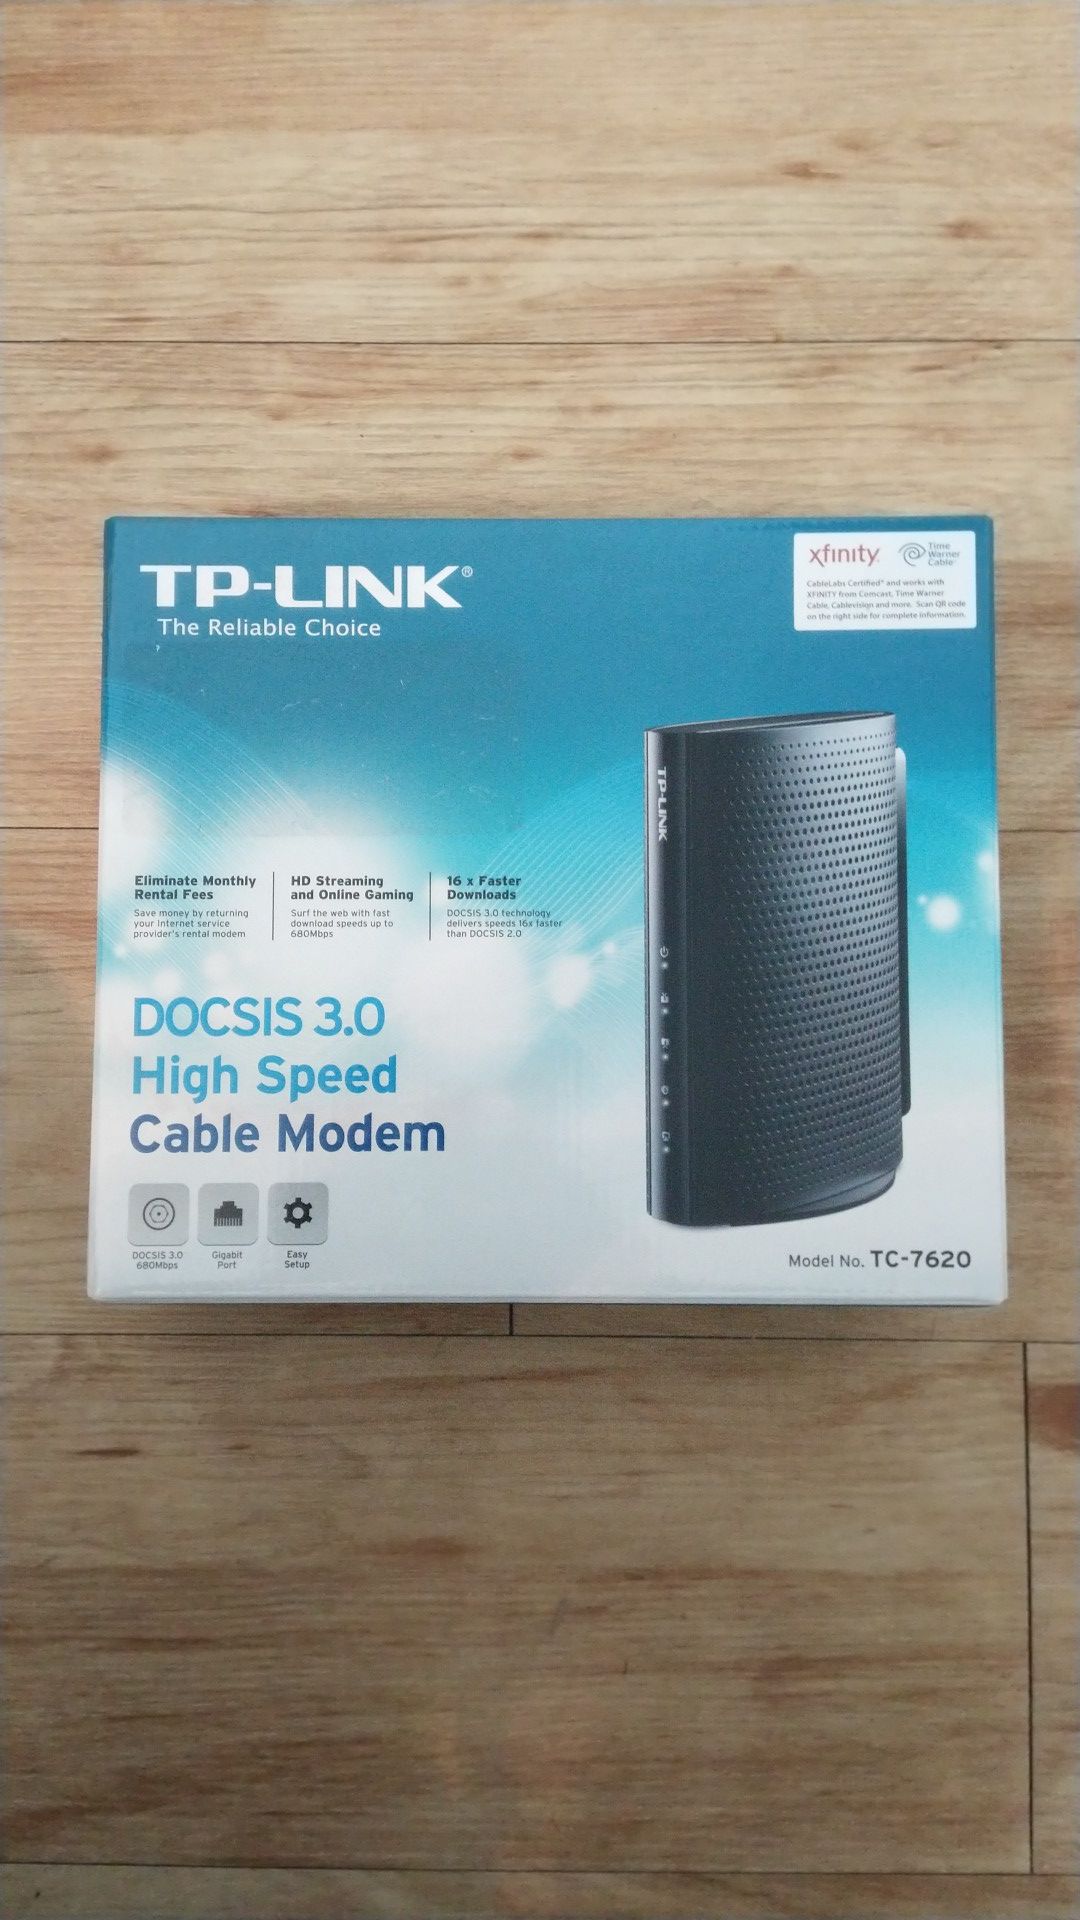 TP-Link DOCSIS 3.0 (16x4) High Speed Cable Modem